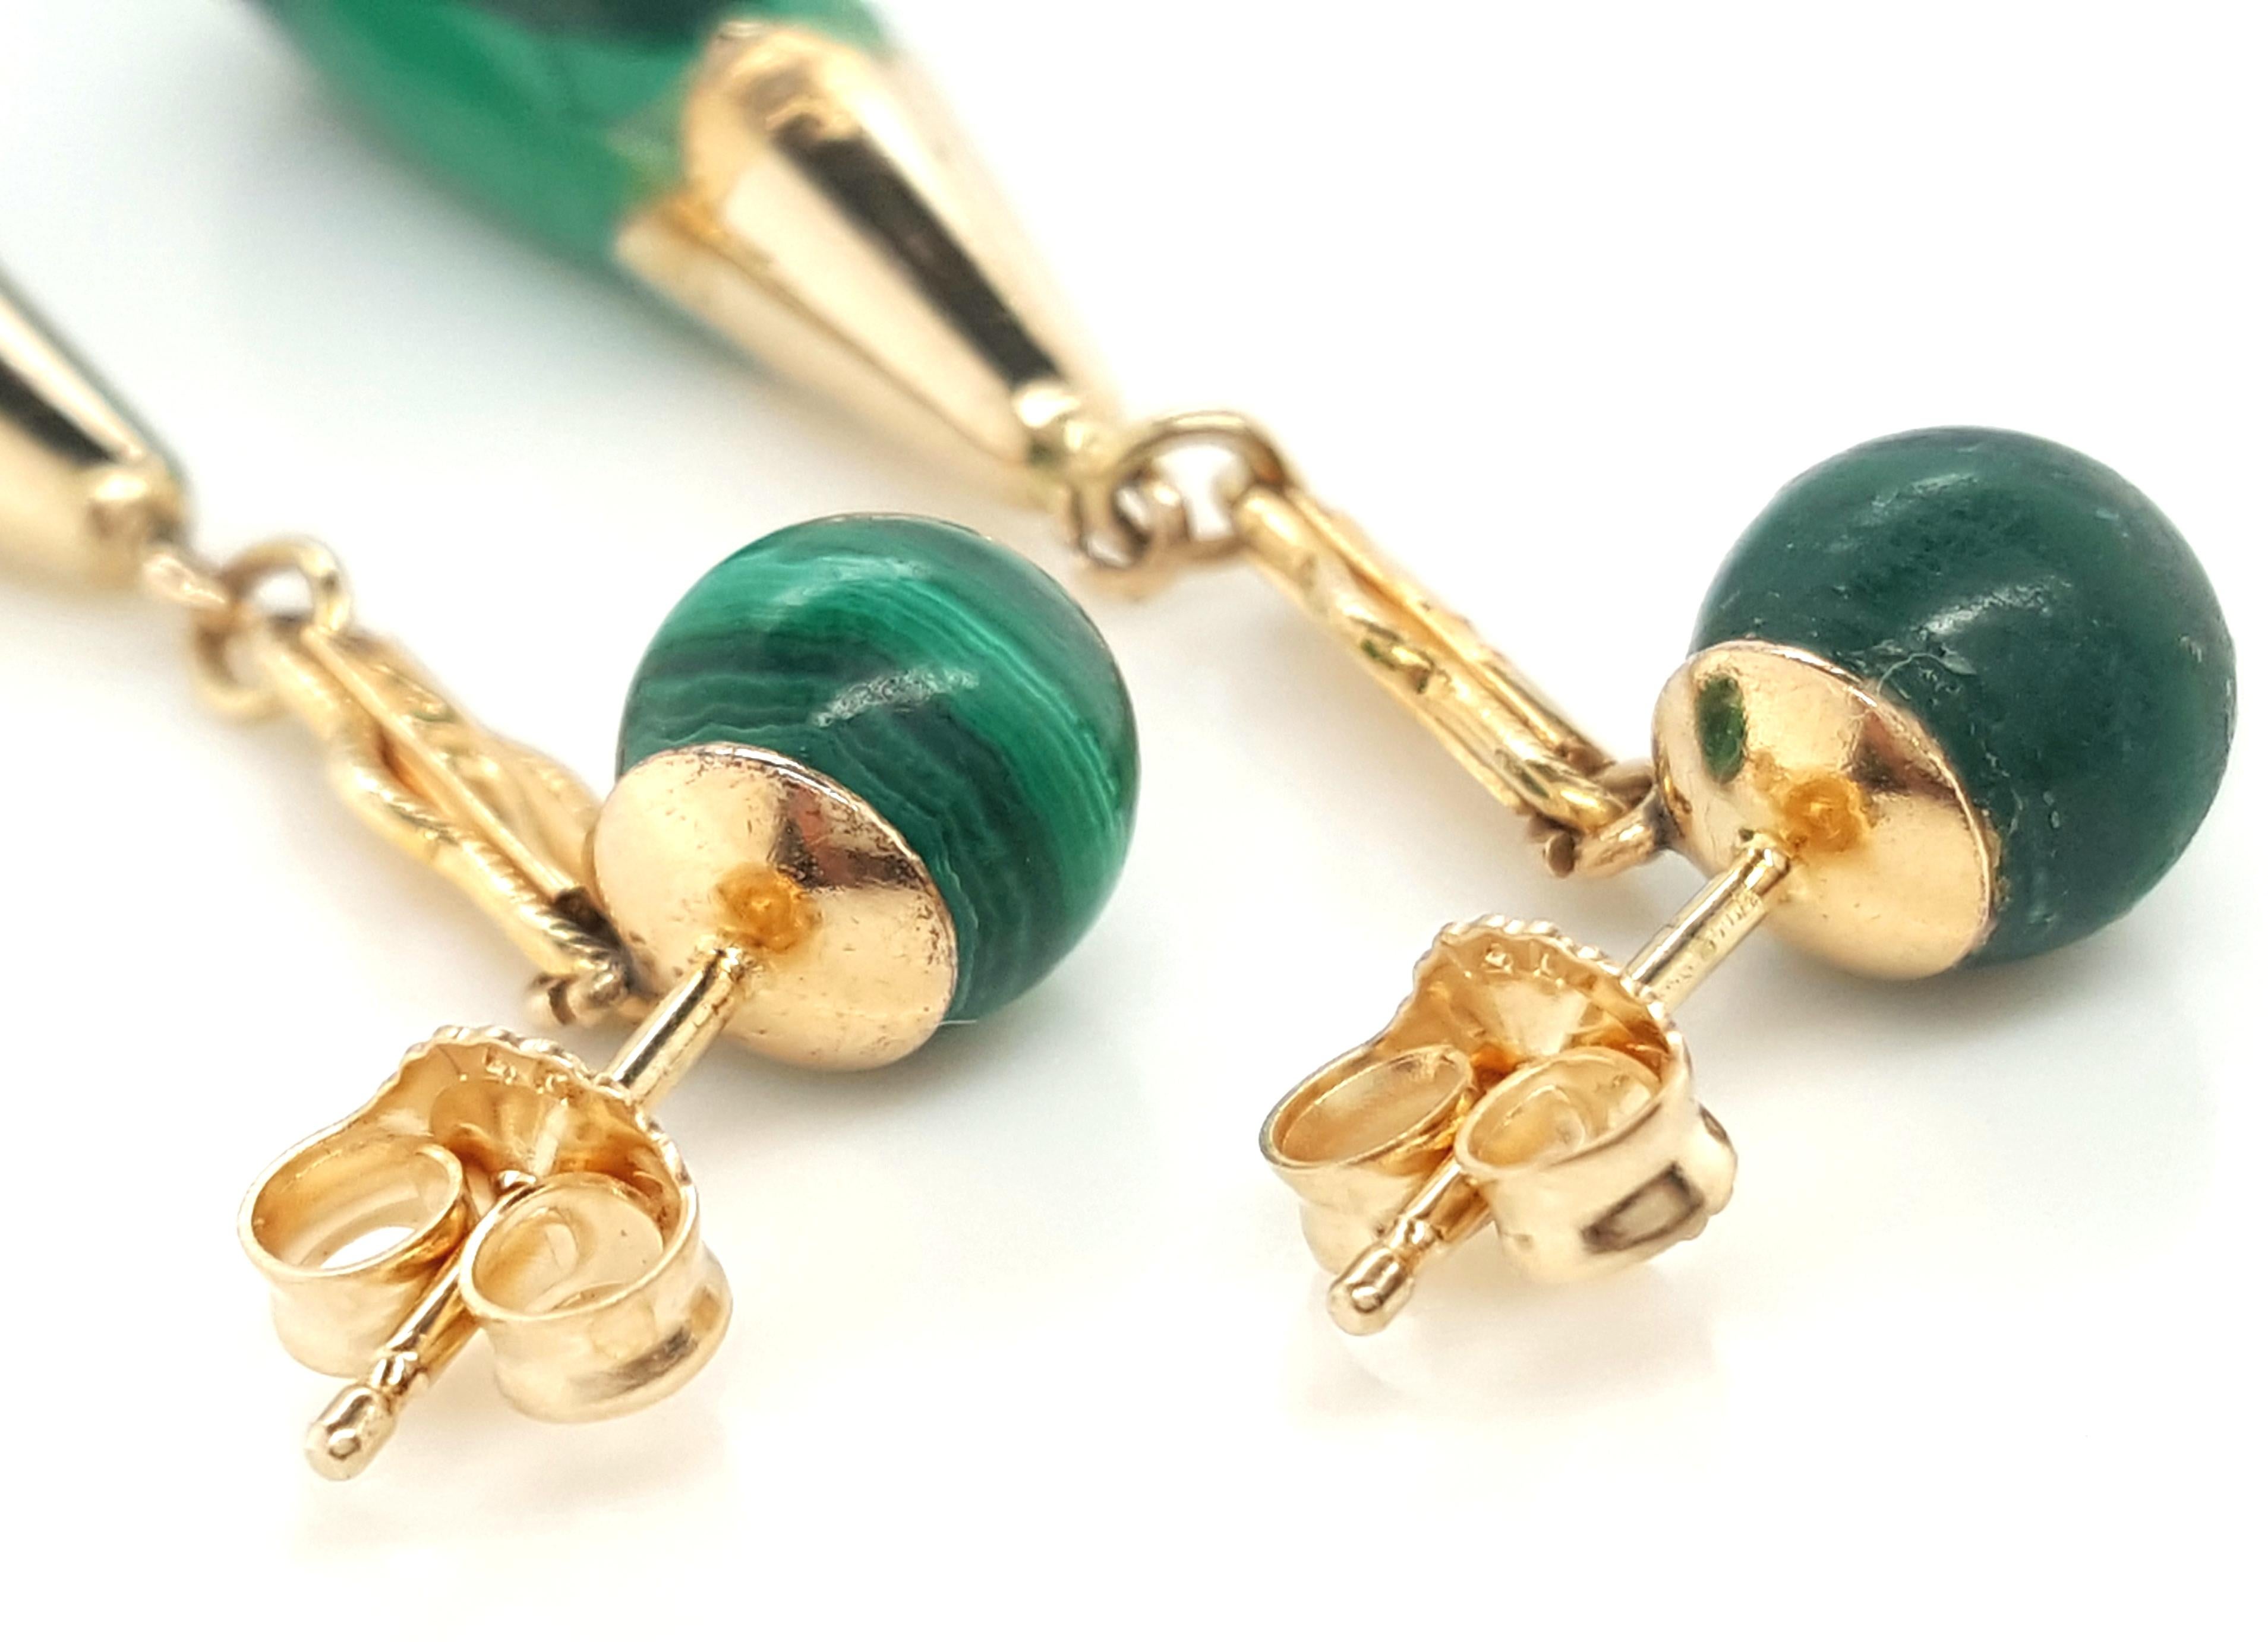 14 Karat Yellow Gold Malachite Drop Earrings, Circa 1980's. The earrings feature a beautiful and striking pair of pear shaped smooth briolette cut malachites each set into a 14 karat yellow gold cap with an undulating detail suspended by a textured